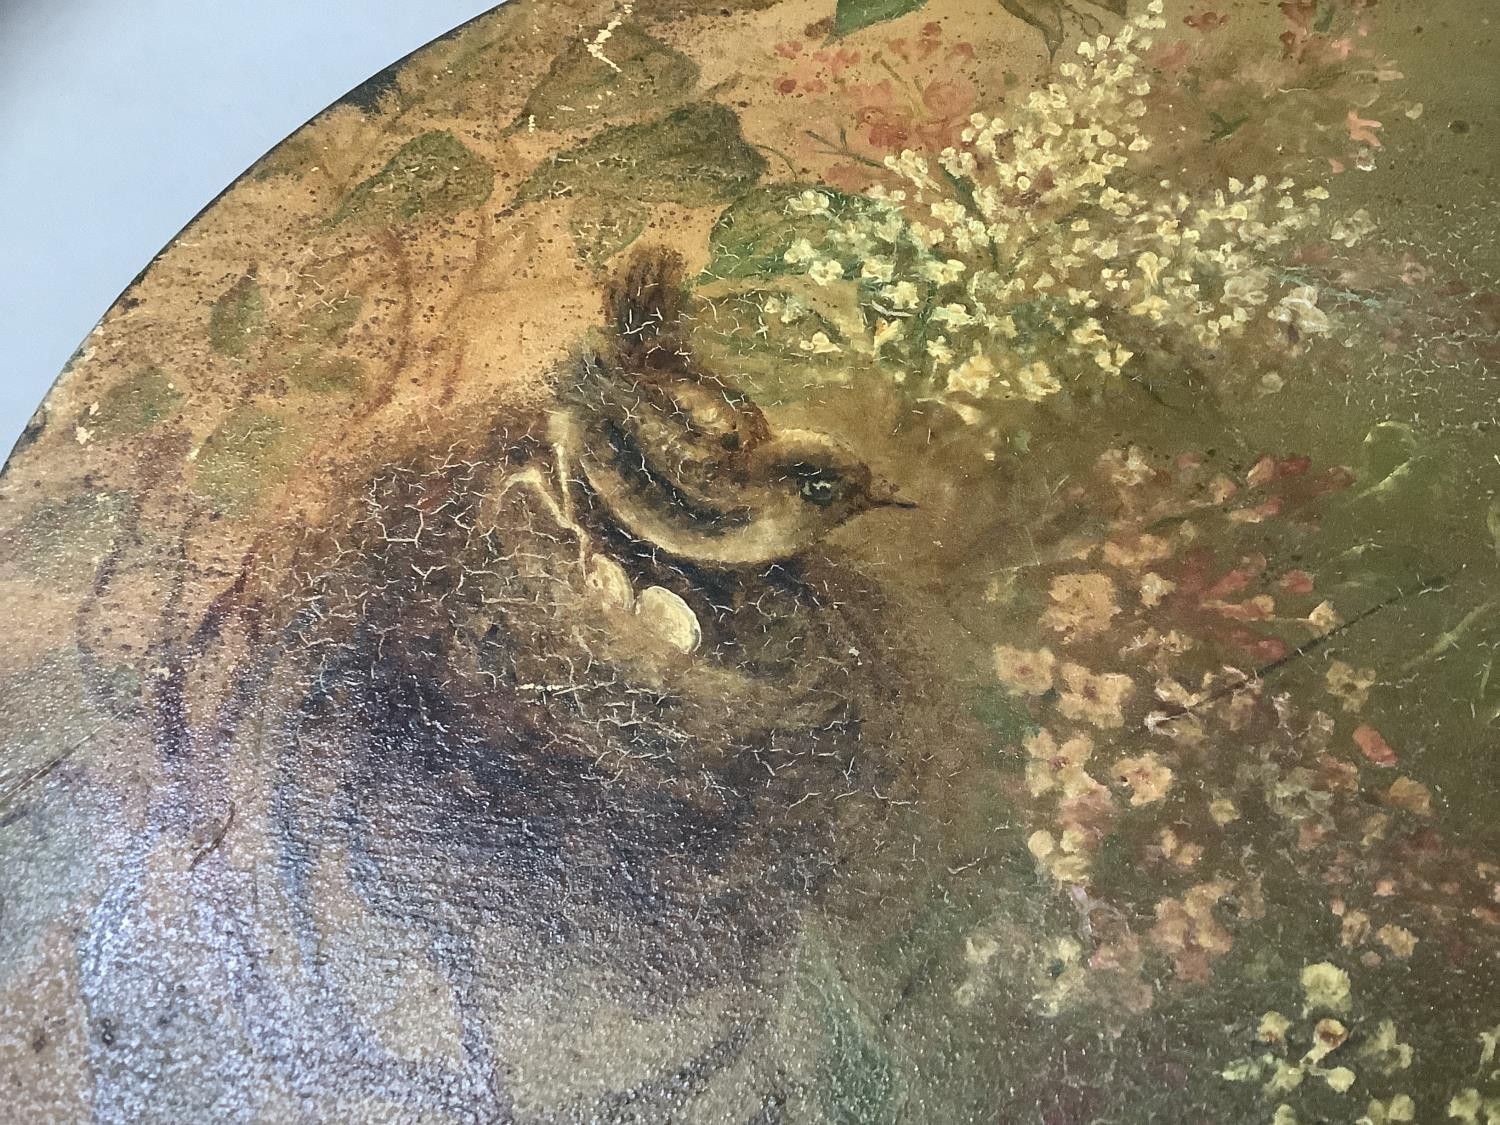 A Tamborine, painted with two wrens on a nest within foliage, 36cm diameter - Image 3 of 3